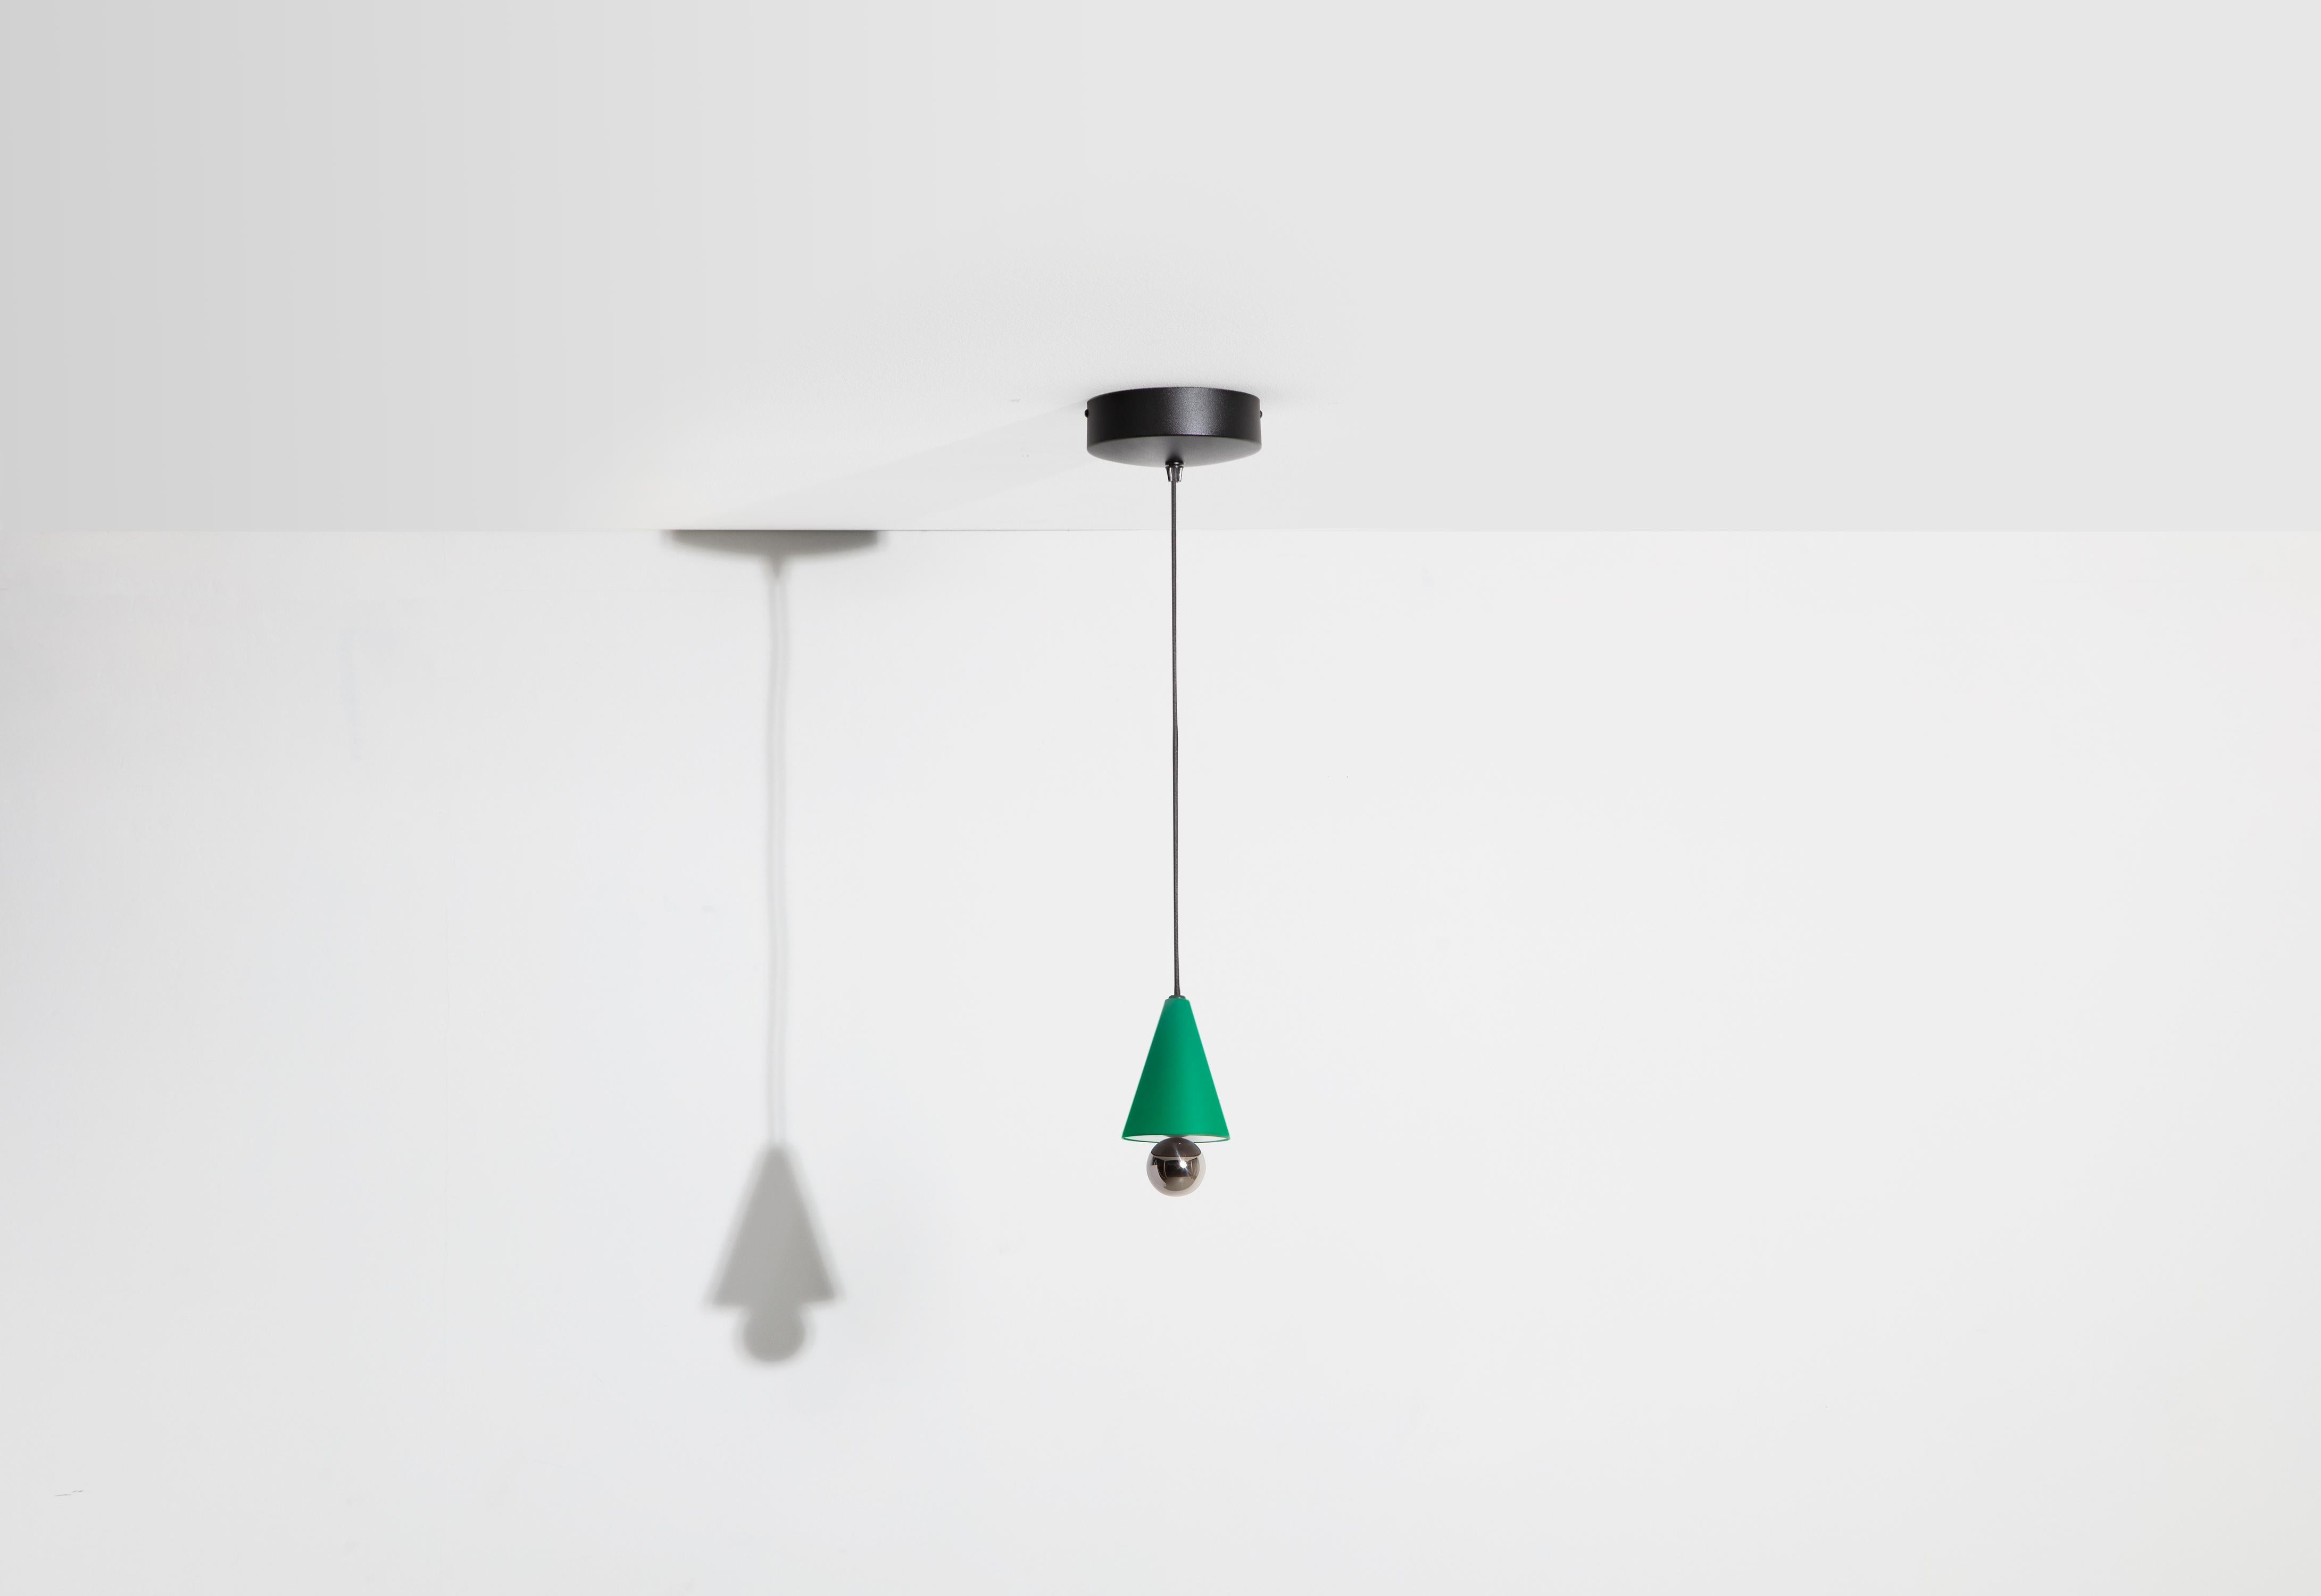 Petite Friture XS Cherry LED Pendant Light in Mint-green & Titanium Aluminium by Daniel and Emma, 2020

In 2015, the Australian duo designers Daniel and Emma signed Cherry a simple and minimalist pendant lamp design ; an aluminum cone with a